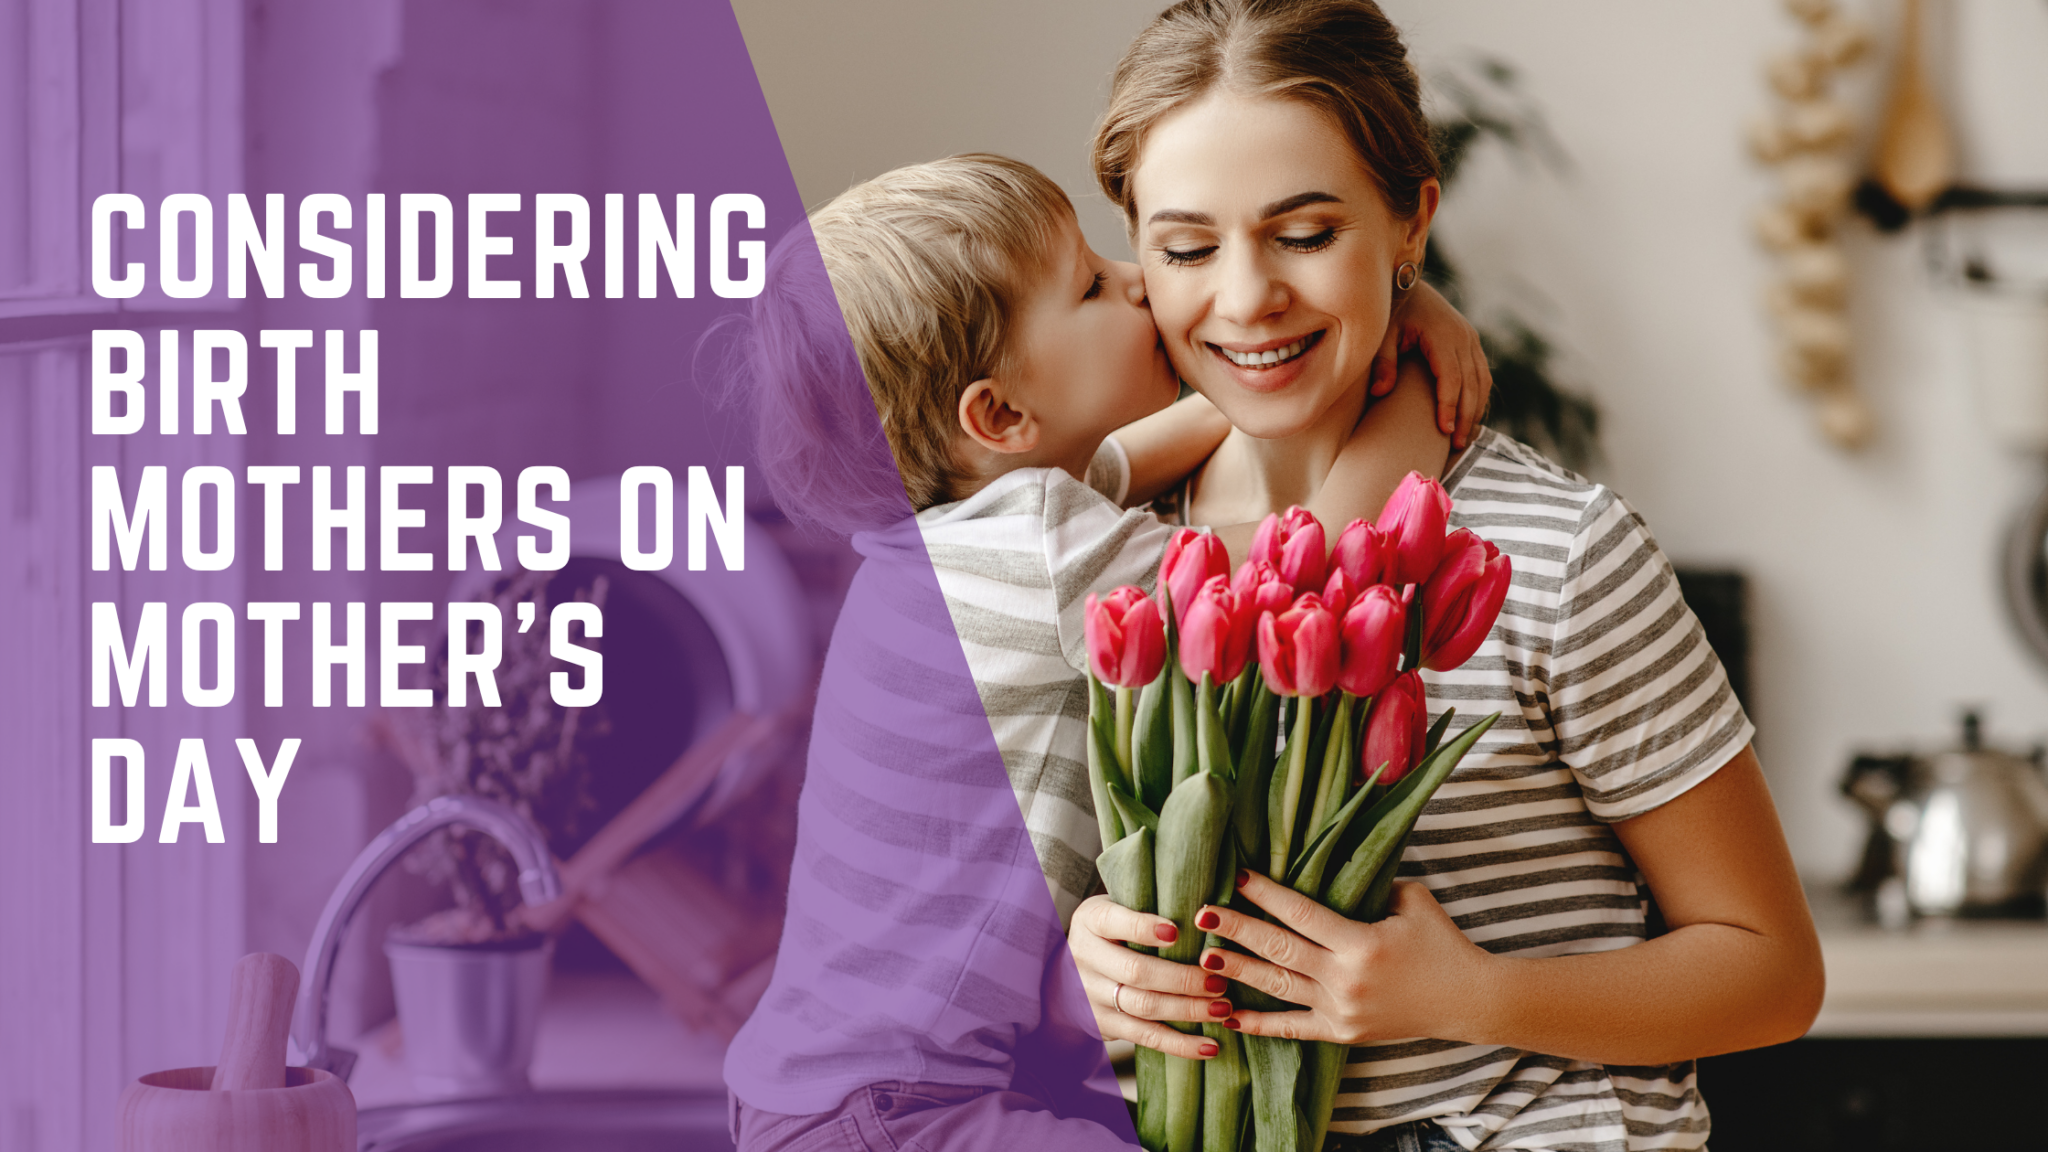 Considering Birth Mothers on Mother’s Day